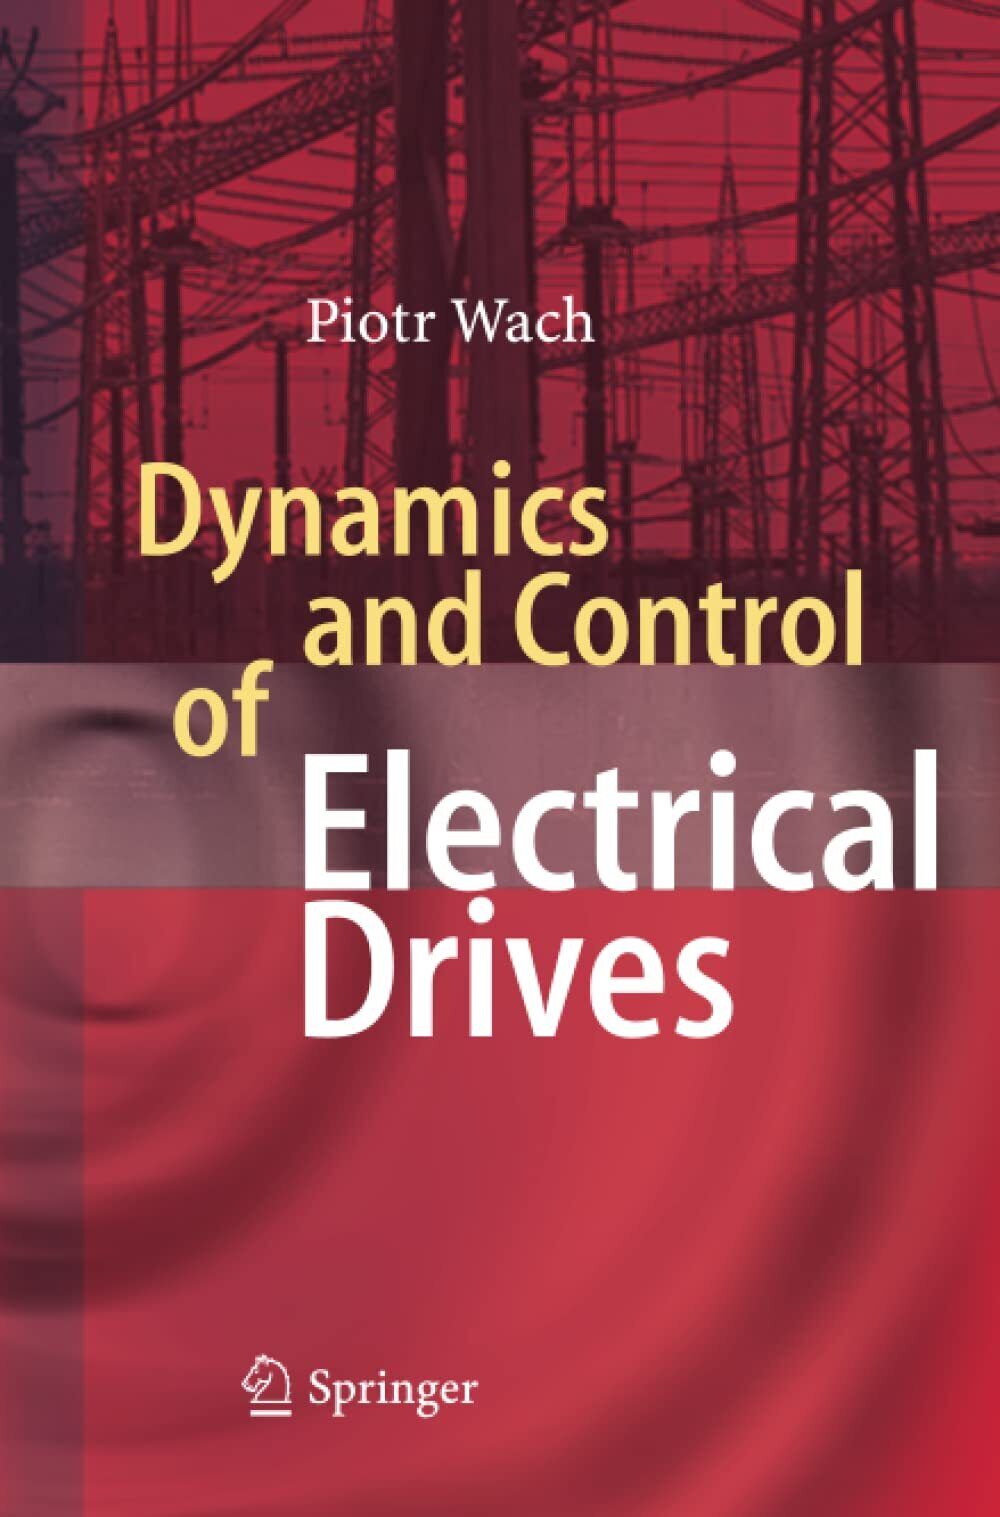 Dynamics and Control of Electrical Drives -  Wach Piotr - Springer, 2014